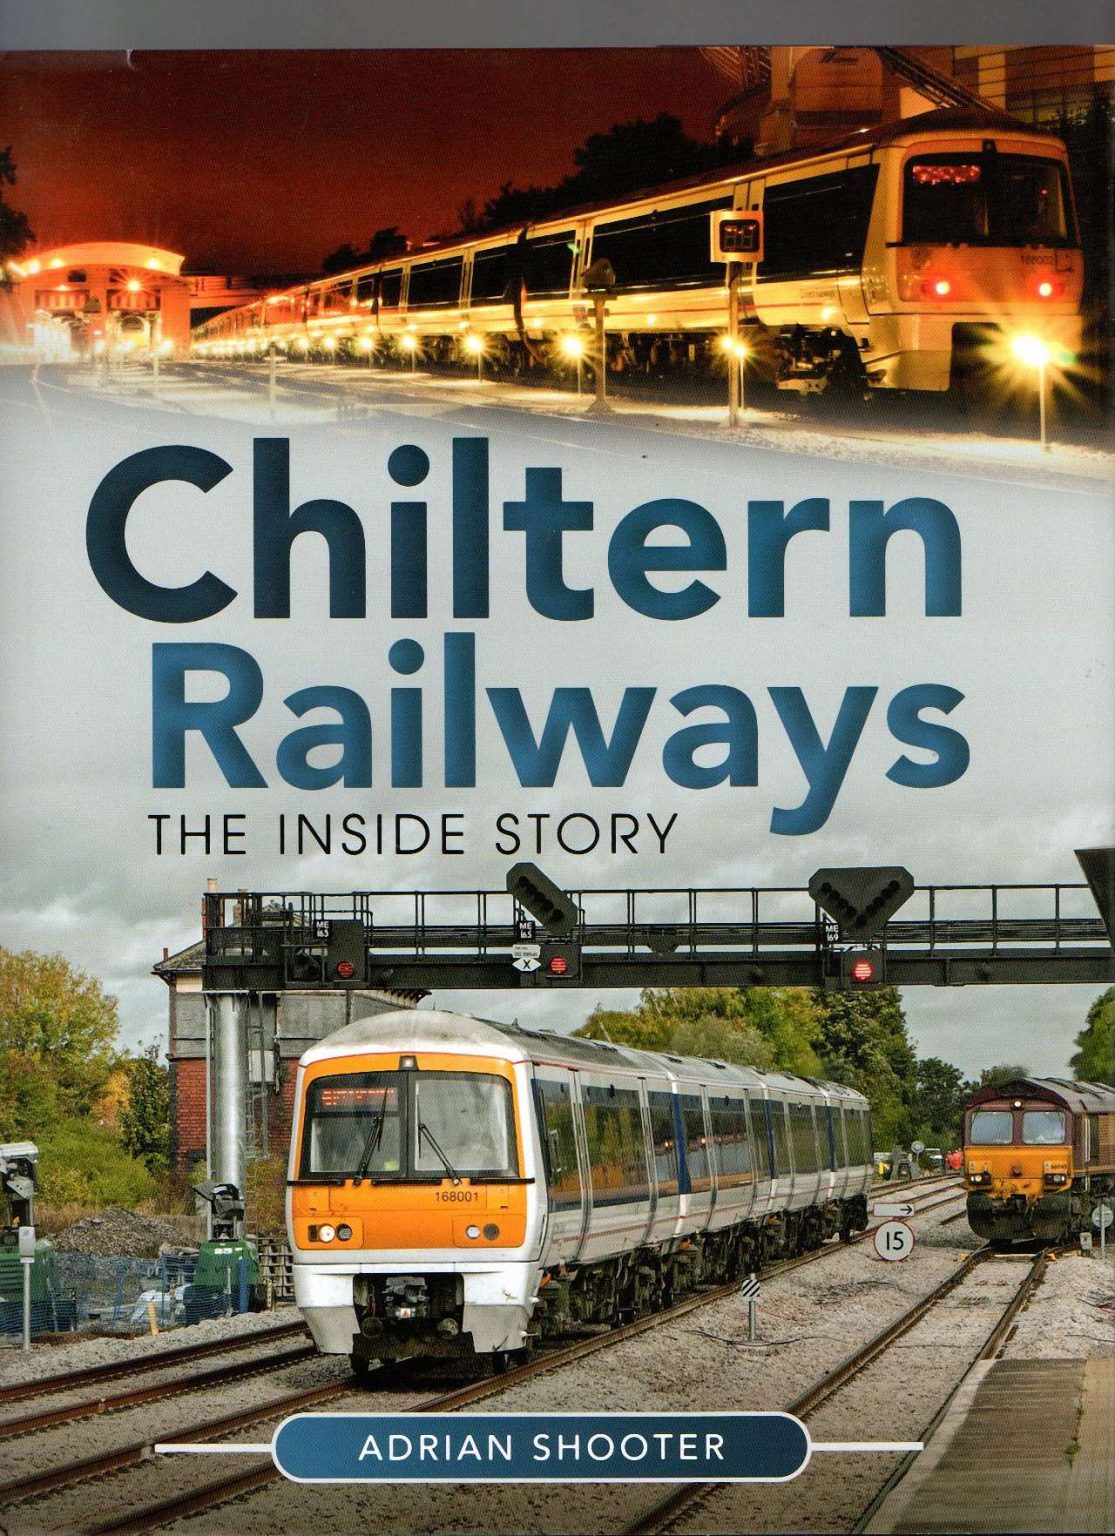 Book Review: Chiltern Railways - The Inside Story by Adrian Shooter